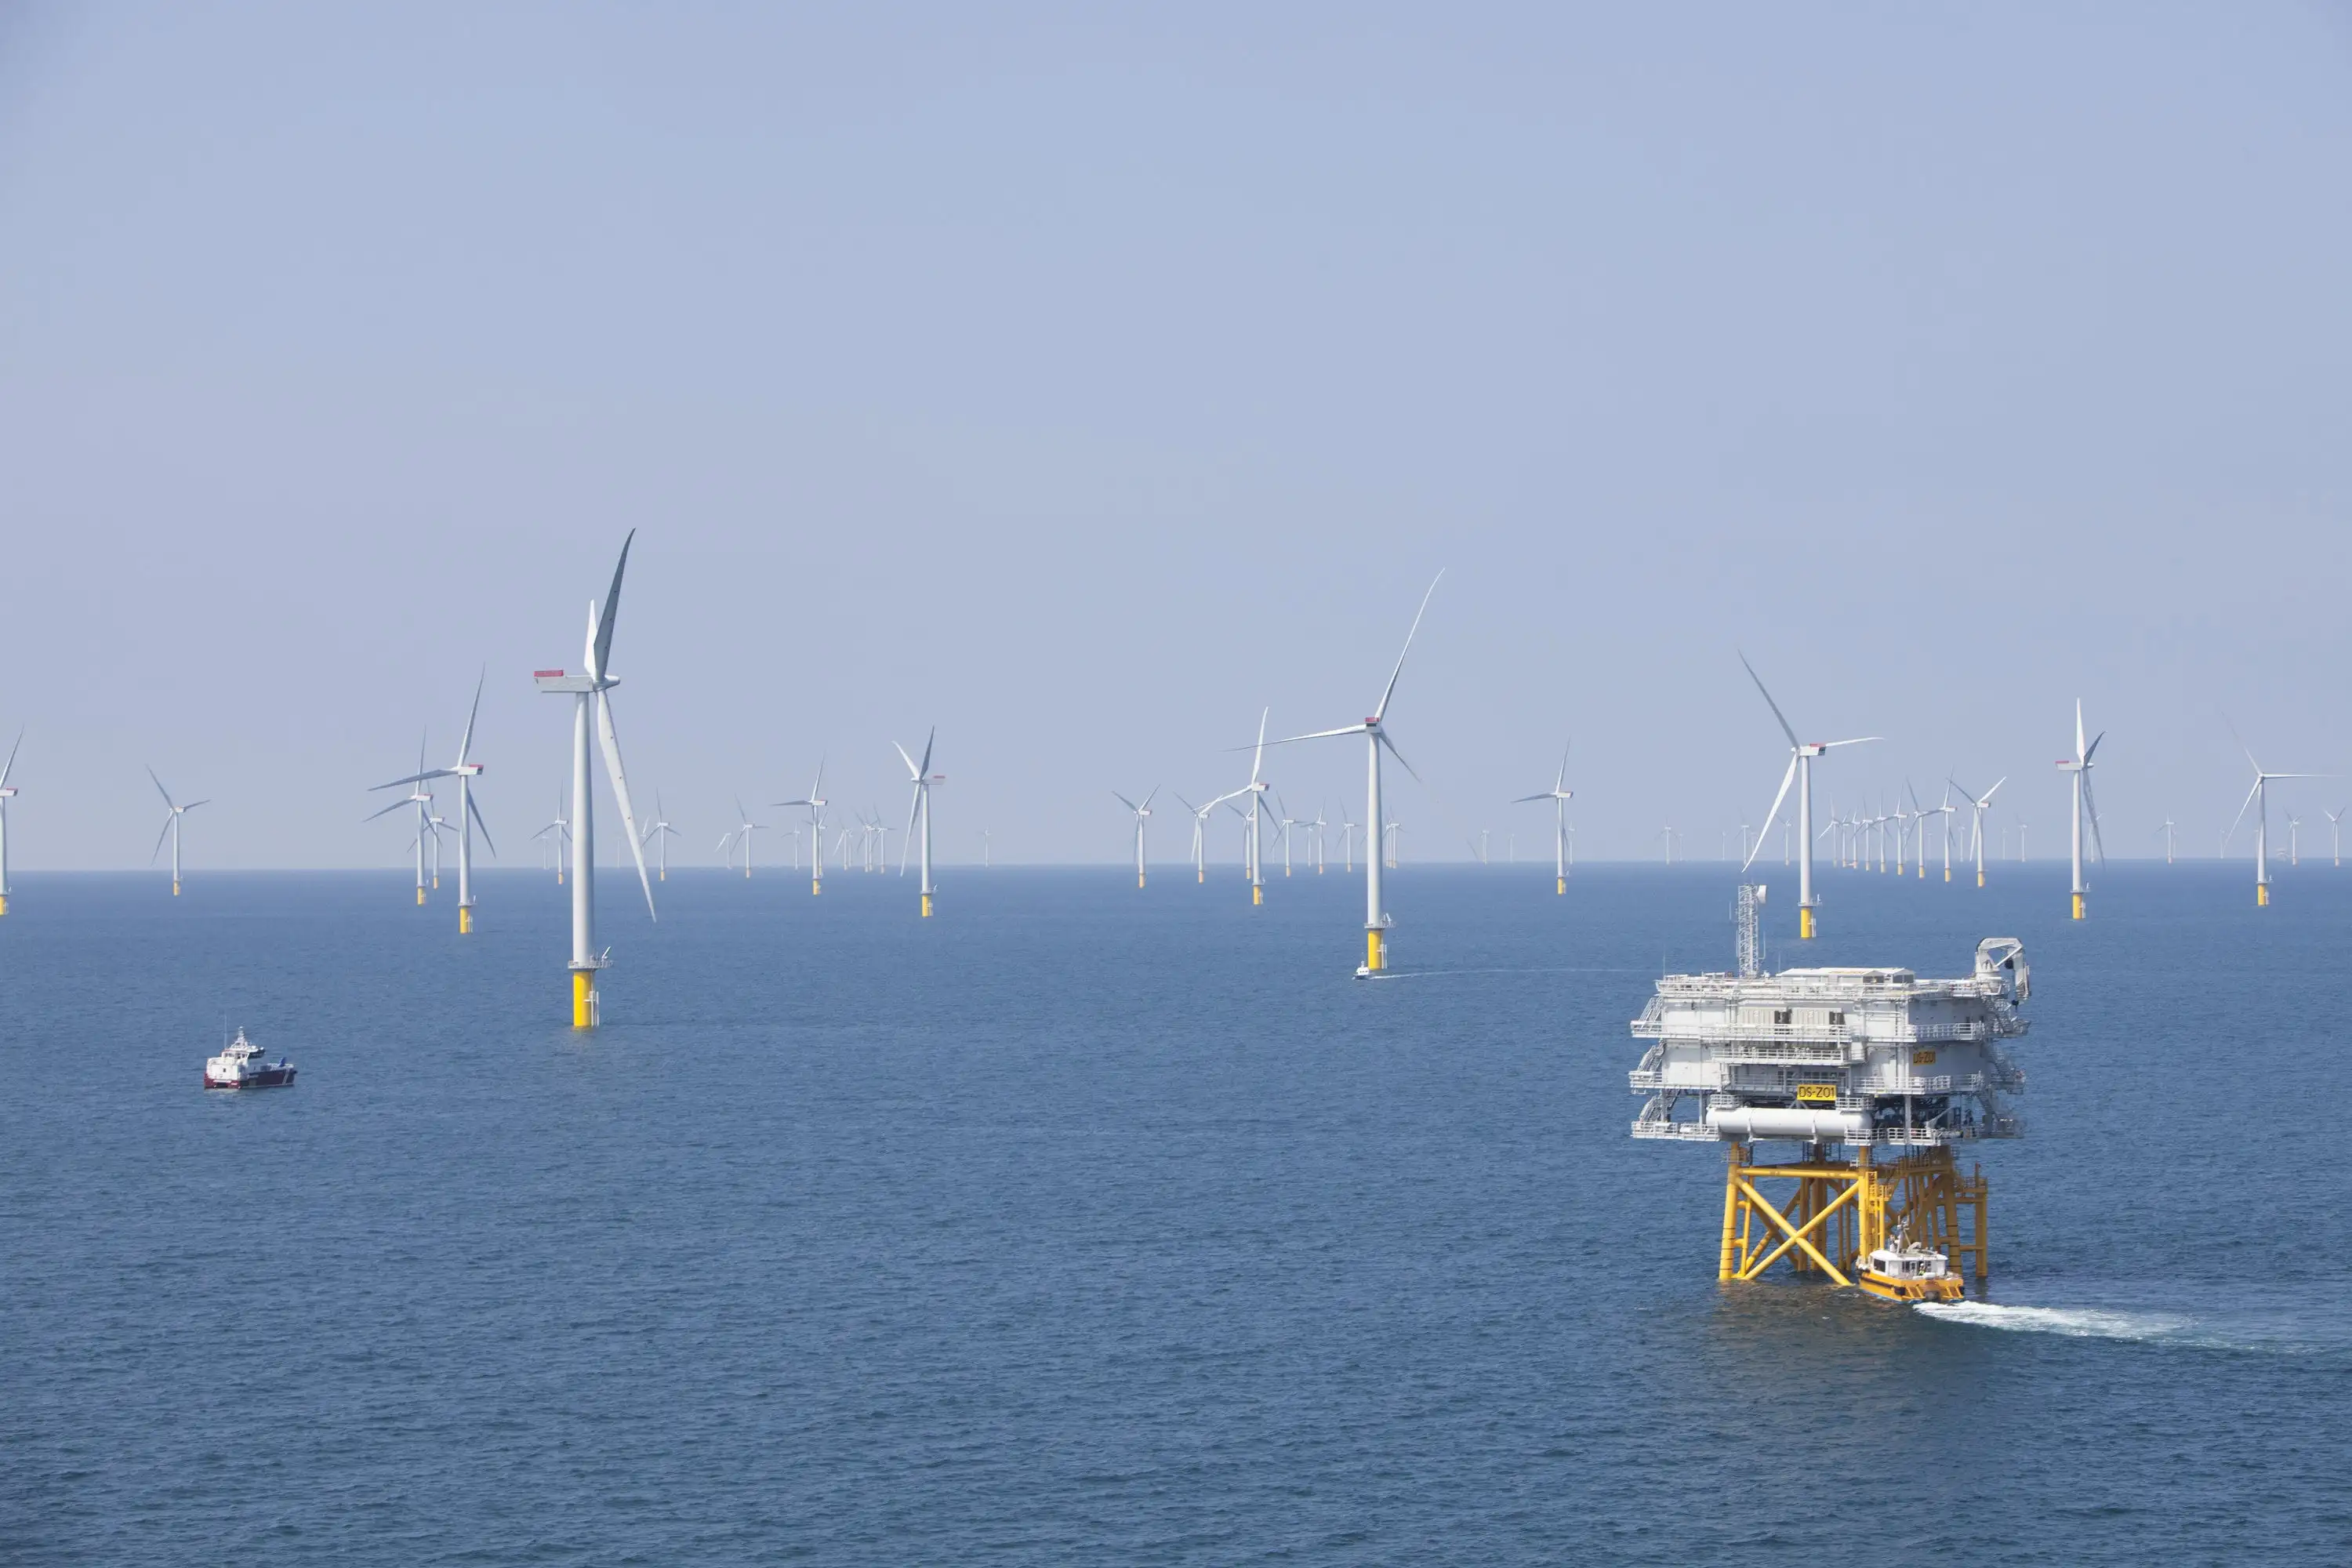 Japan Selects JRE, Iberdrola and Tohoku Electric Power to Build 375 MW Offshore Wind Farm